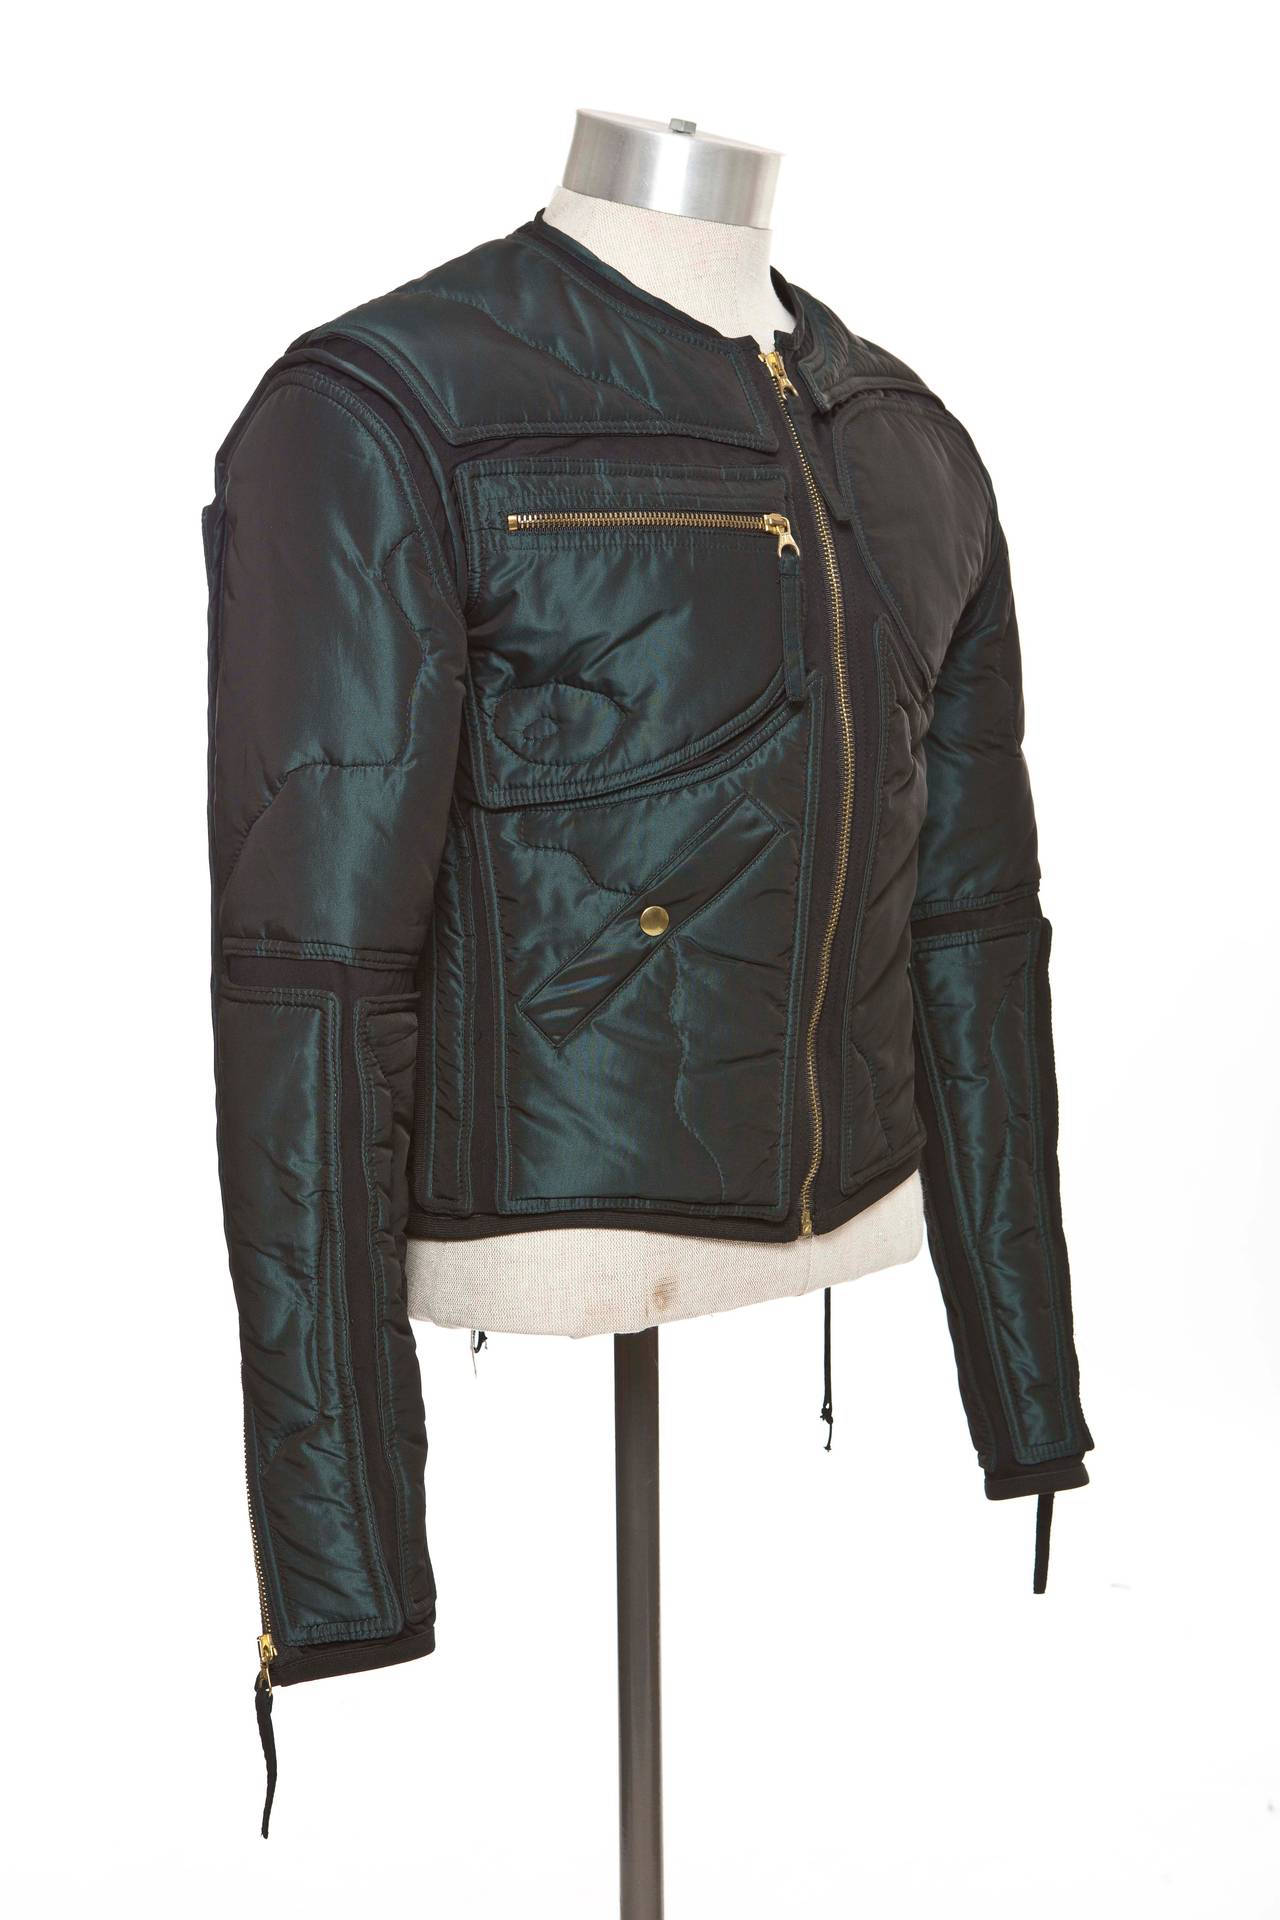 Jean Paul Gaultier, Fall1995, jacket with zippered sleeve cuffs, zippered chest pockets, two pockets at front; one with zip closure and one with snap closure and exposed zip closure at center front. Size not listed, estimated from